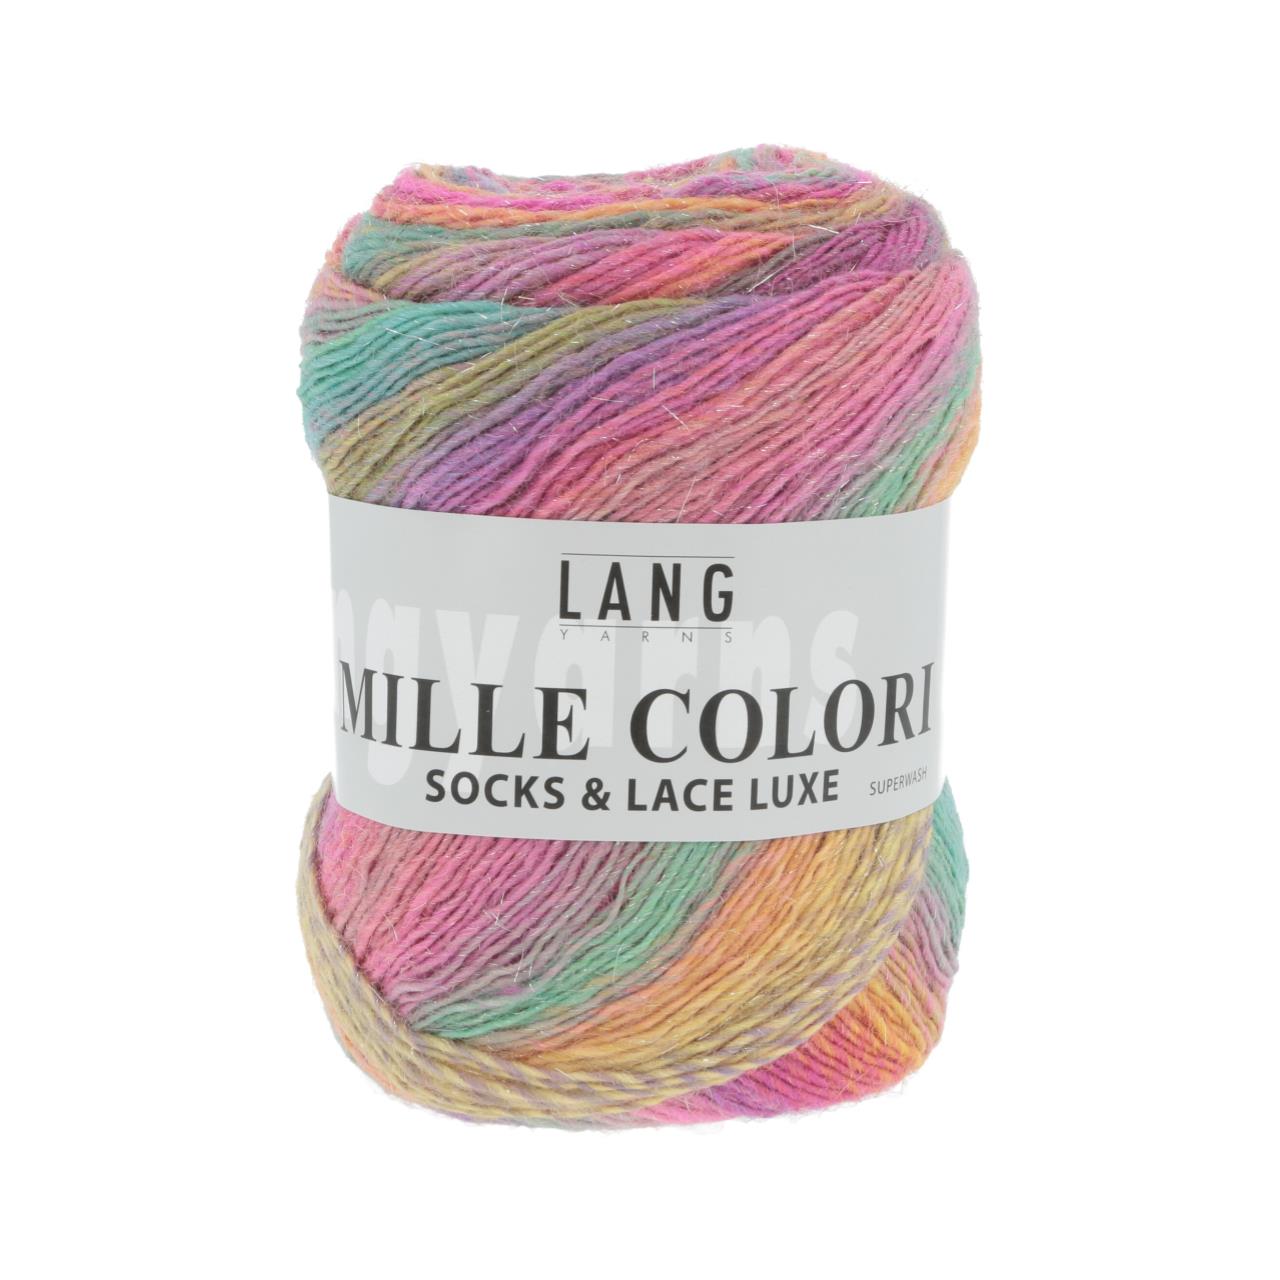 Mille Colori Socks & Lace Luxe 53 Bunt Pink/Mint/Gelb